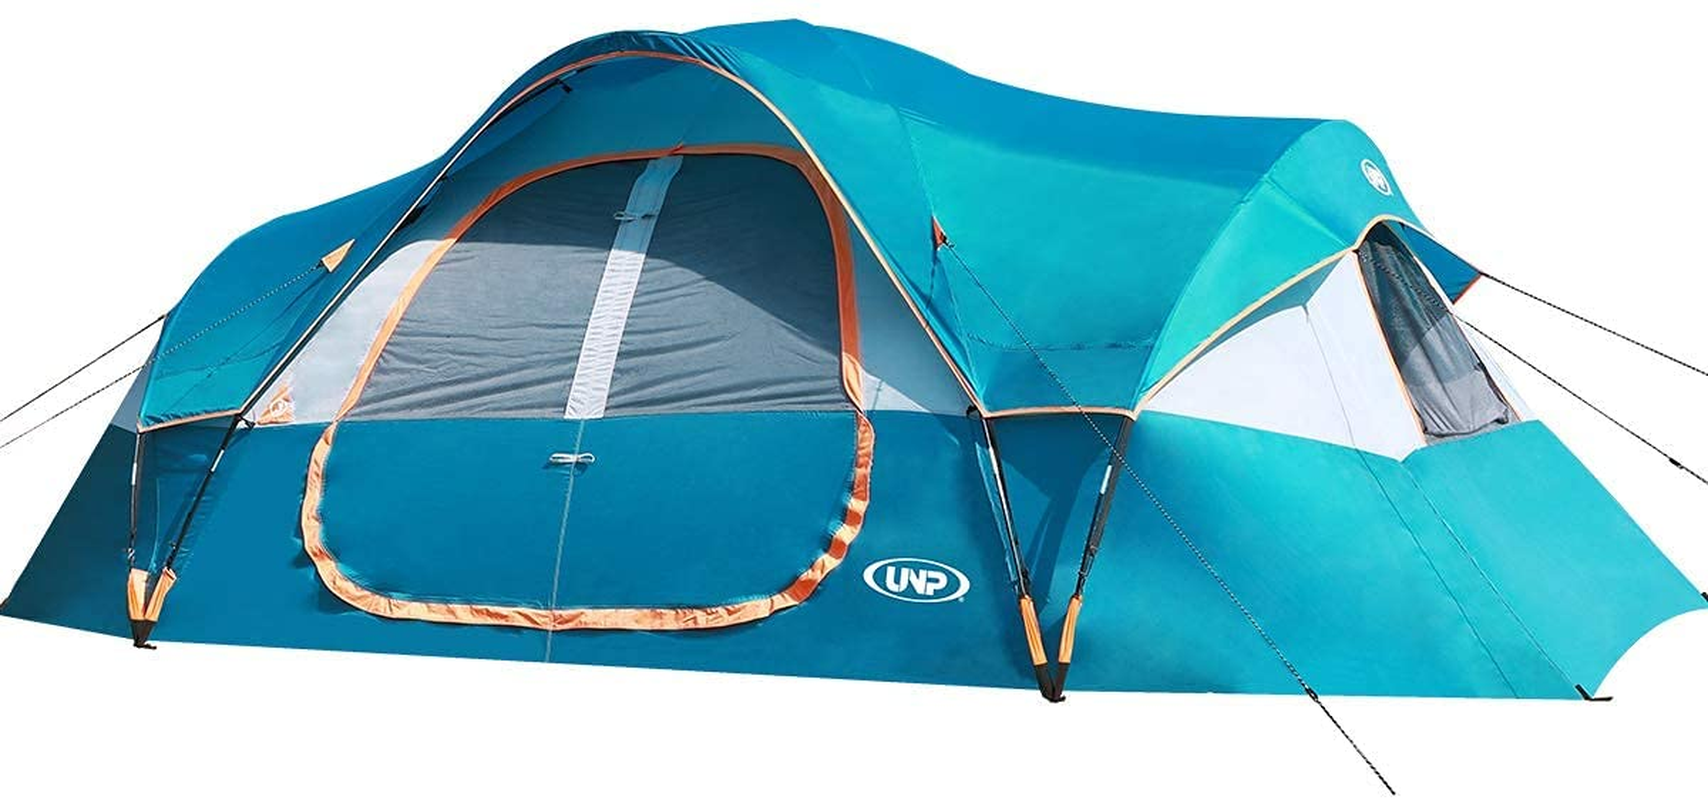 63 Family Camping Tents With Full Rain Fly ideas